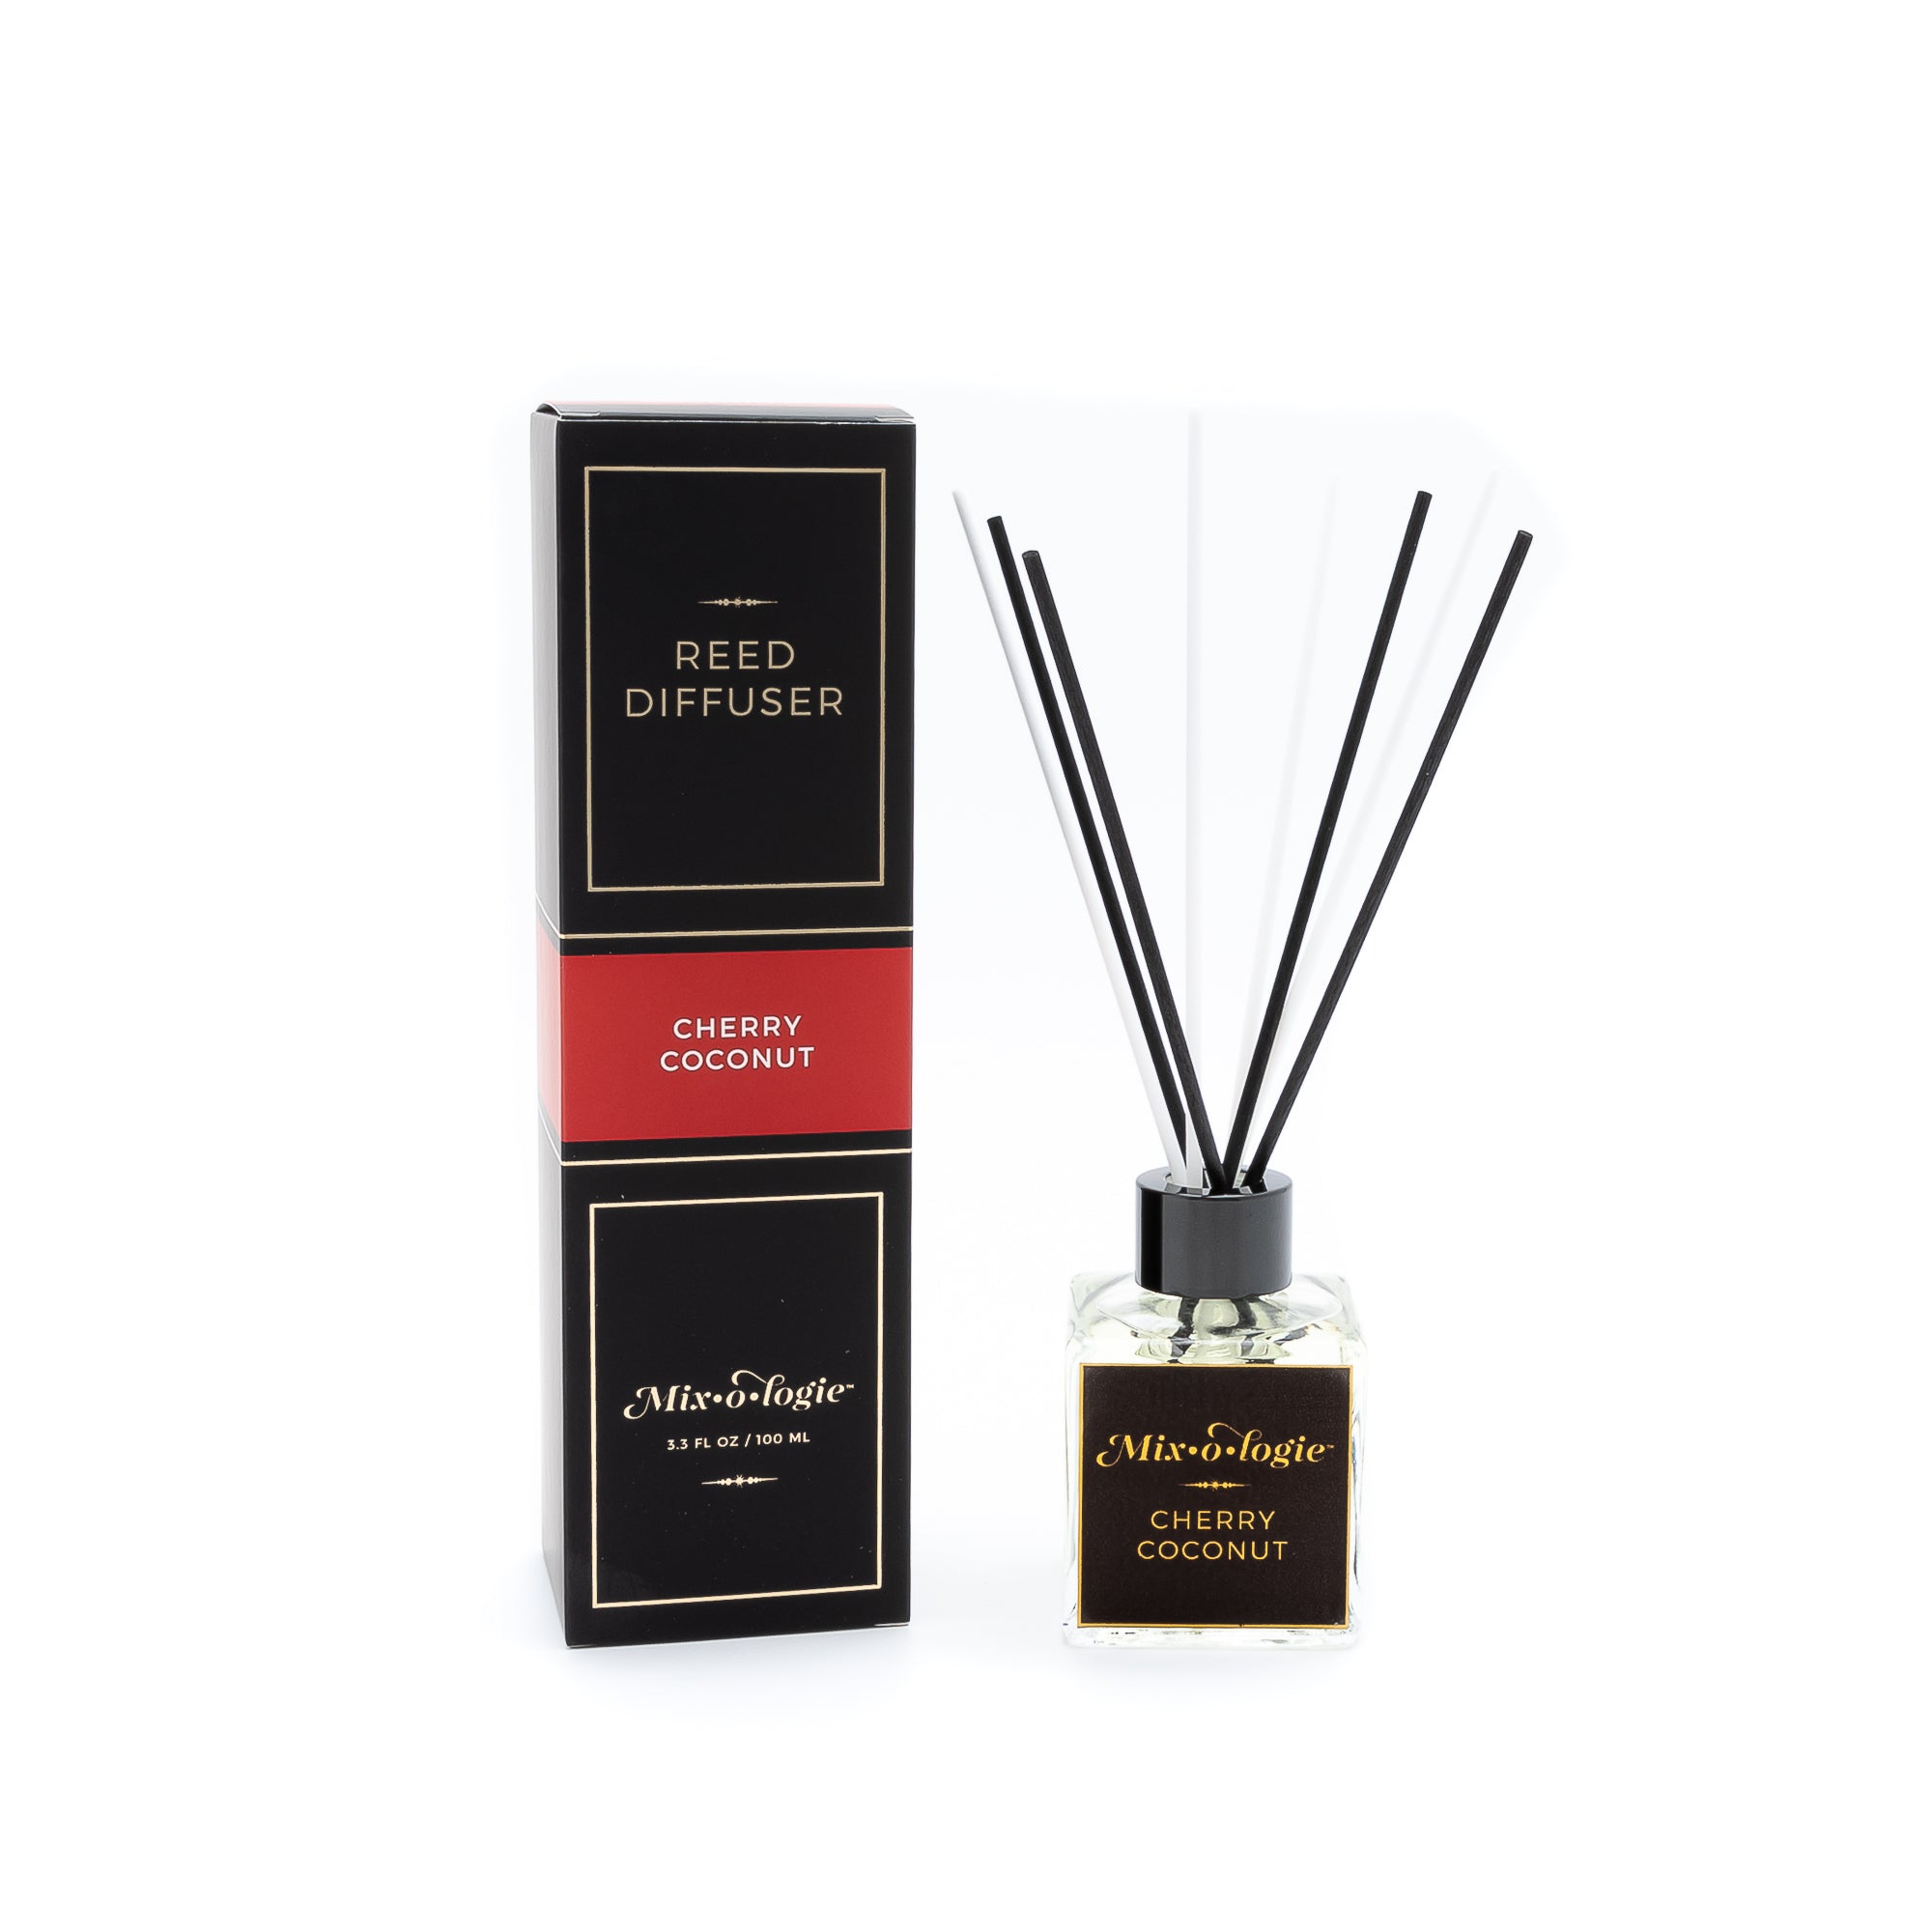 Cherry Coconut Reed Diffuser TESTER